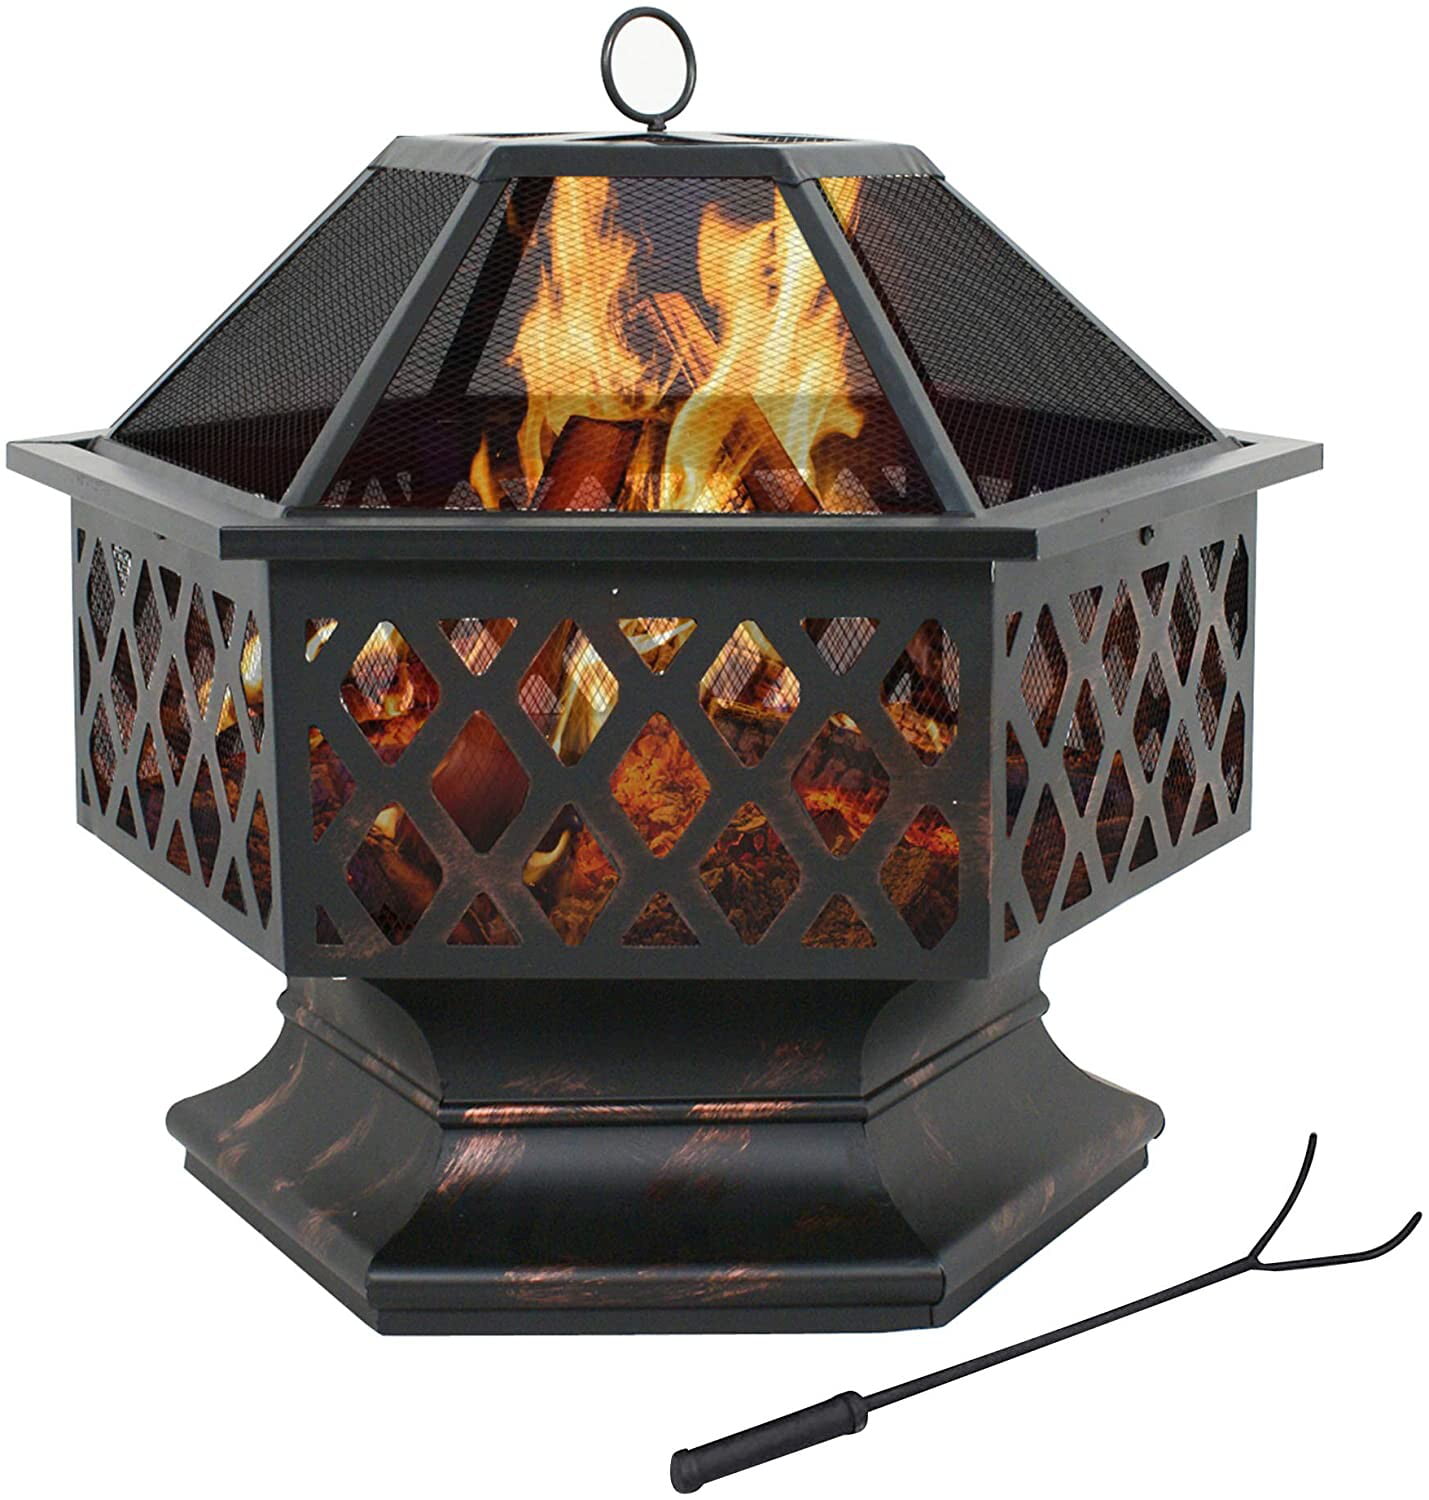 Square Wood Burning Fire Pit With Mesh, Mainstays 30 Square Fire Pit